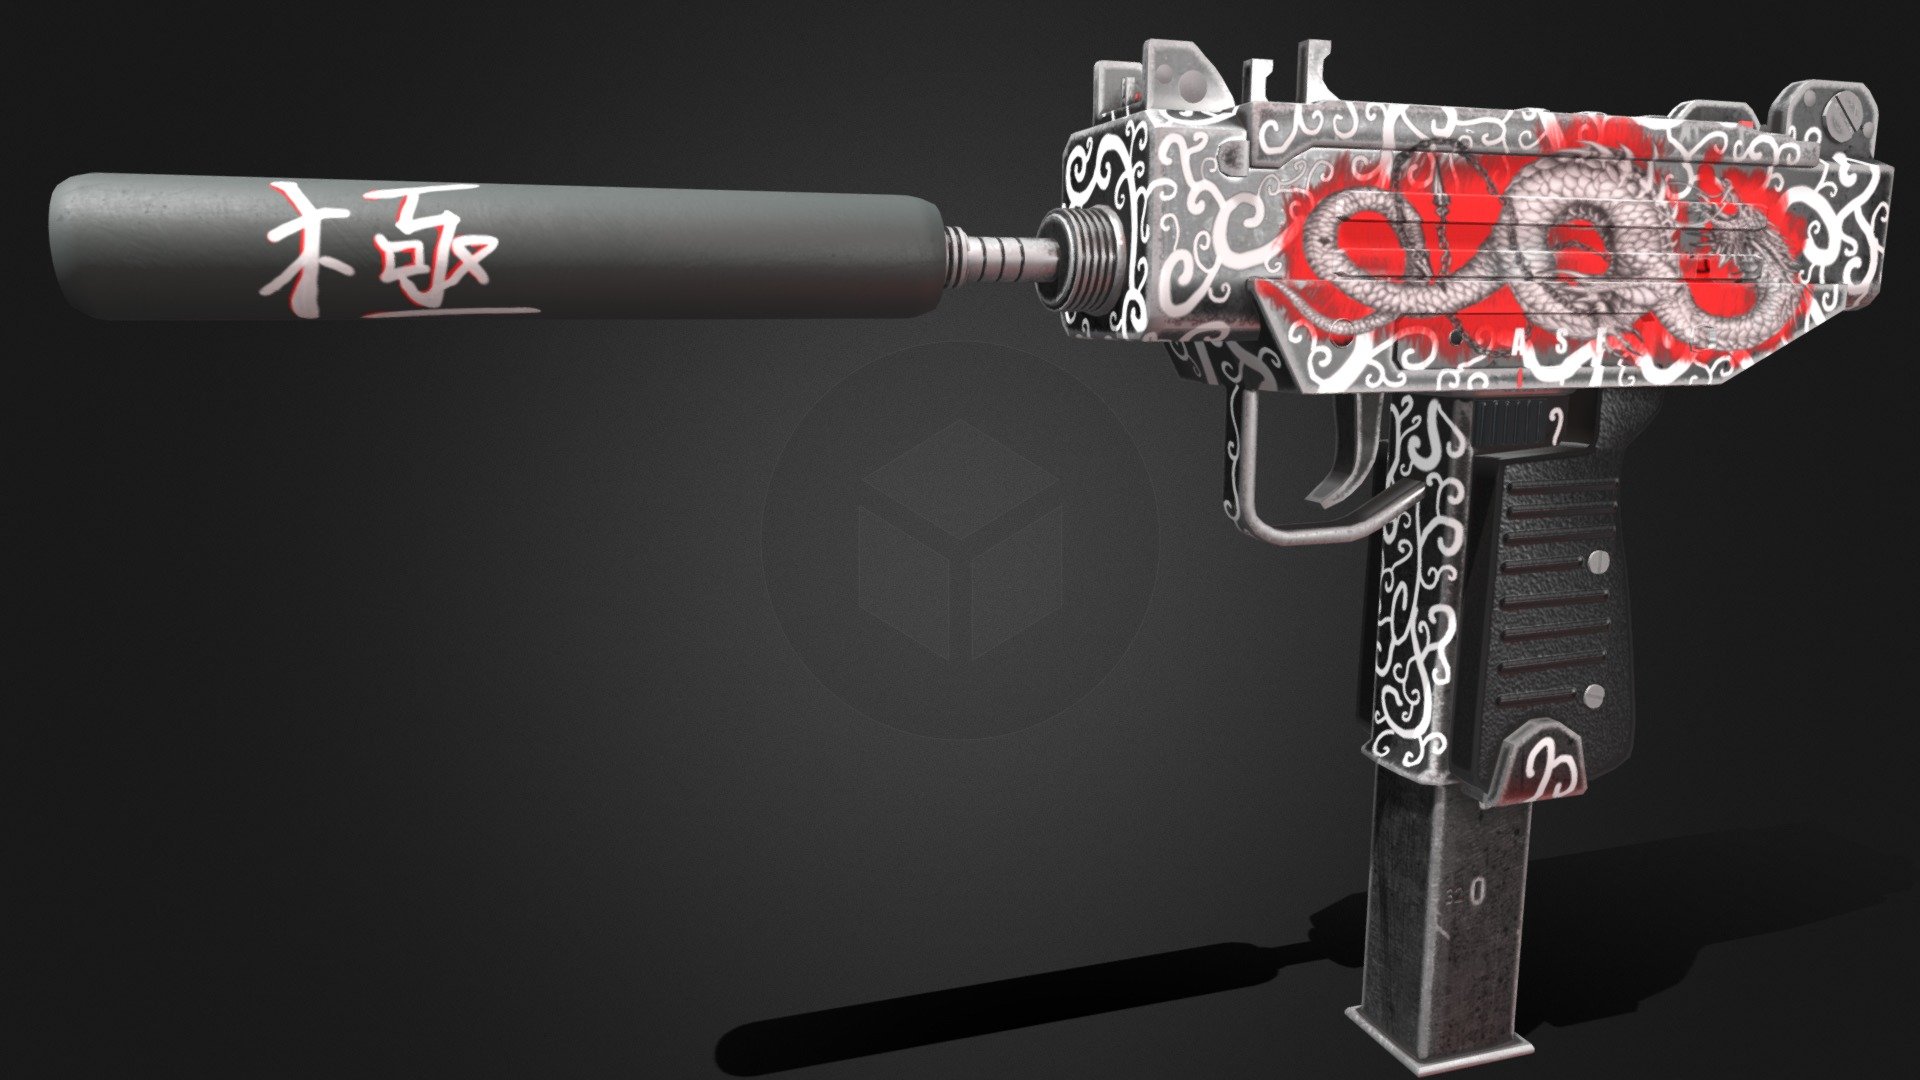 This is a Mini UZI , it has a drake skin on that was designed by me and then textured onto the model, this could be used as a skin that could drop from a loot chest or player could buy. The design and the texture was inspired by japanese colour scheme and theme/ design.

This was modelled and UV mapped in Maya 2020, and then it was textured in 3D coat. 

I am currently a part time college student, and practicing with different things.

Check out my twitter : https://twitter.com/KxndxD

Check out my ArtStation : kendemrena.artstation.com - "Drake" Mini Uzi - Buy Royalty Free 3D model by KendeMrena 3d model